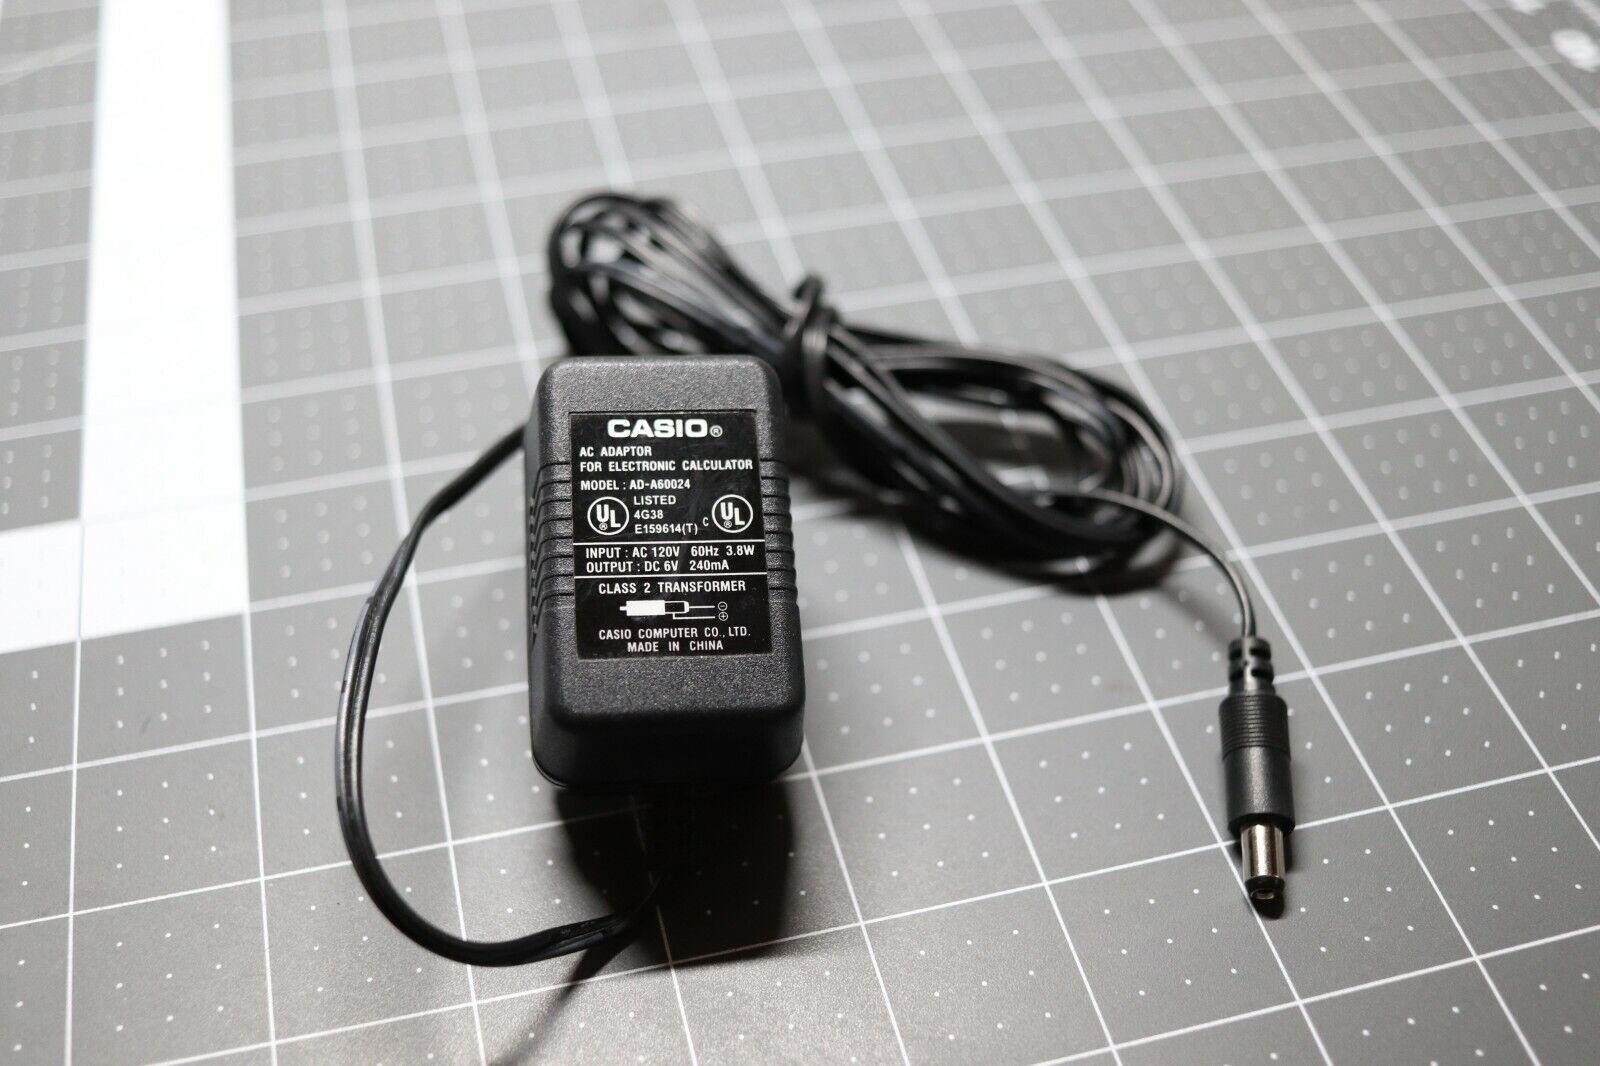 *Brand NEW*Vintage Casio DC6V 240mA AC Adapter Power AD-A60024 Electronic Calculator Replacement Cord Power Su